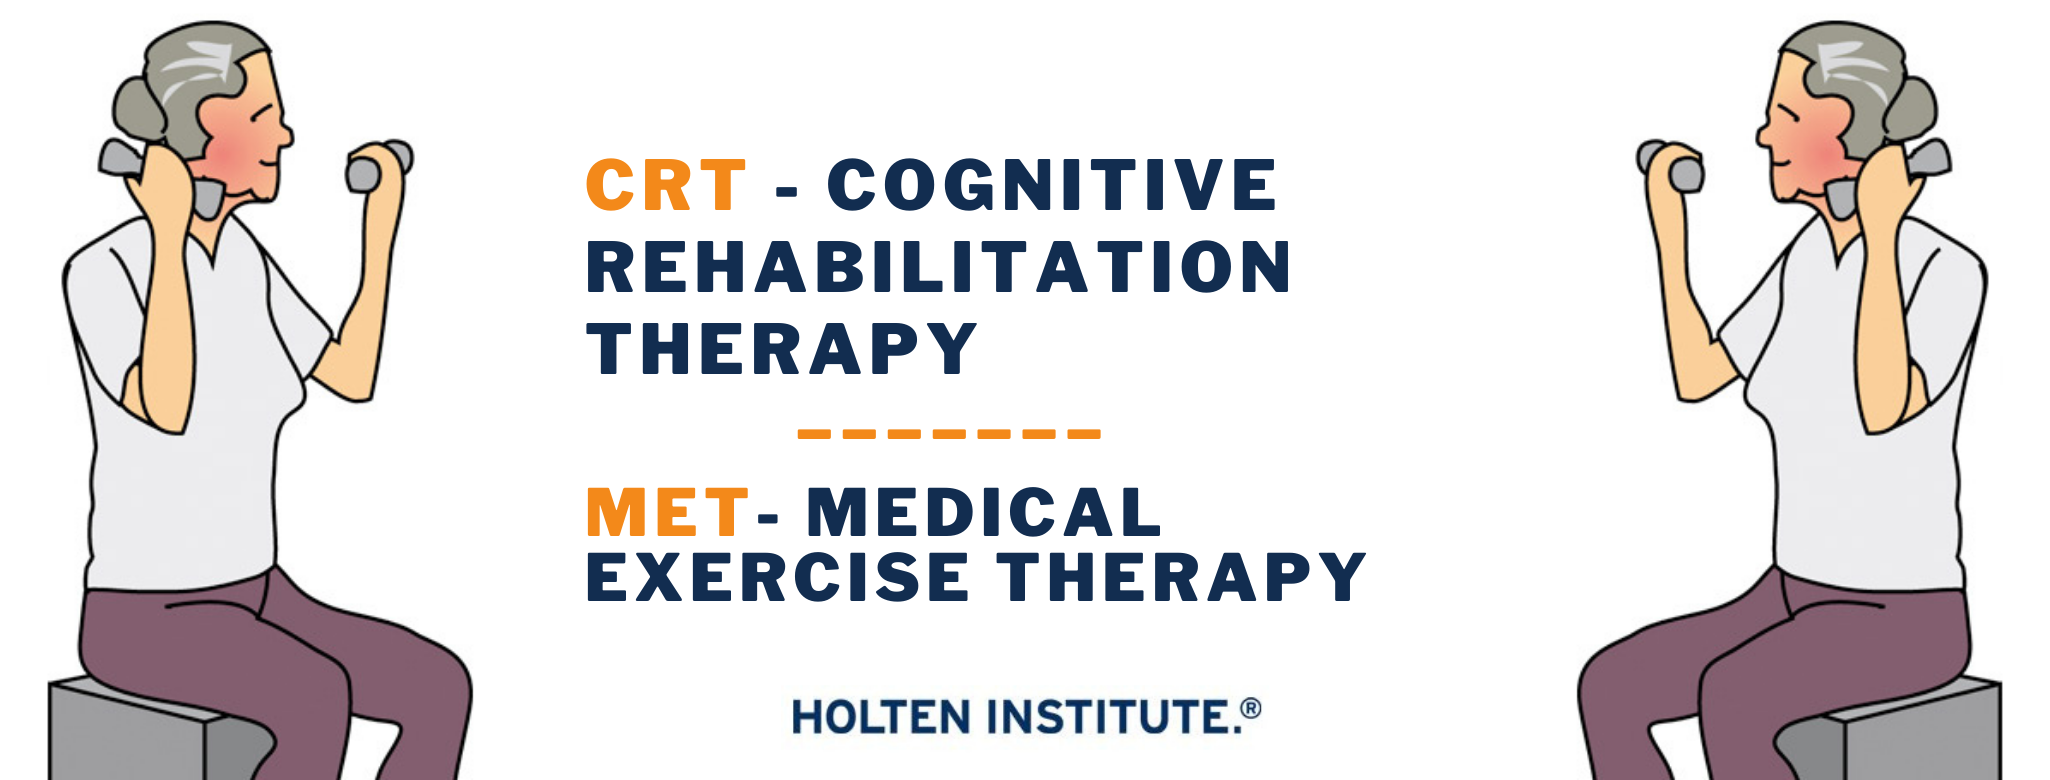 COGNITIVE REHABILITATION THERAPY - CRT